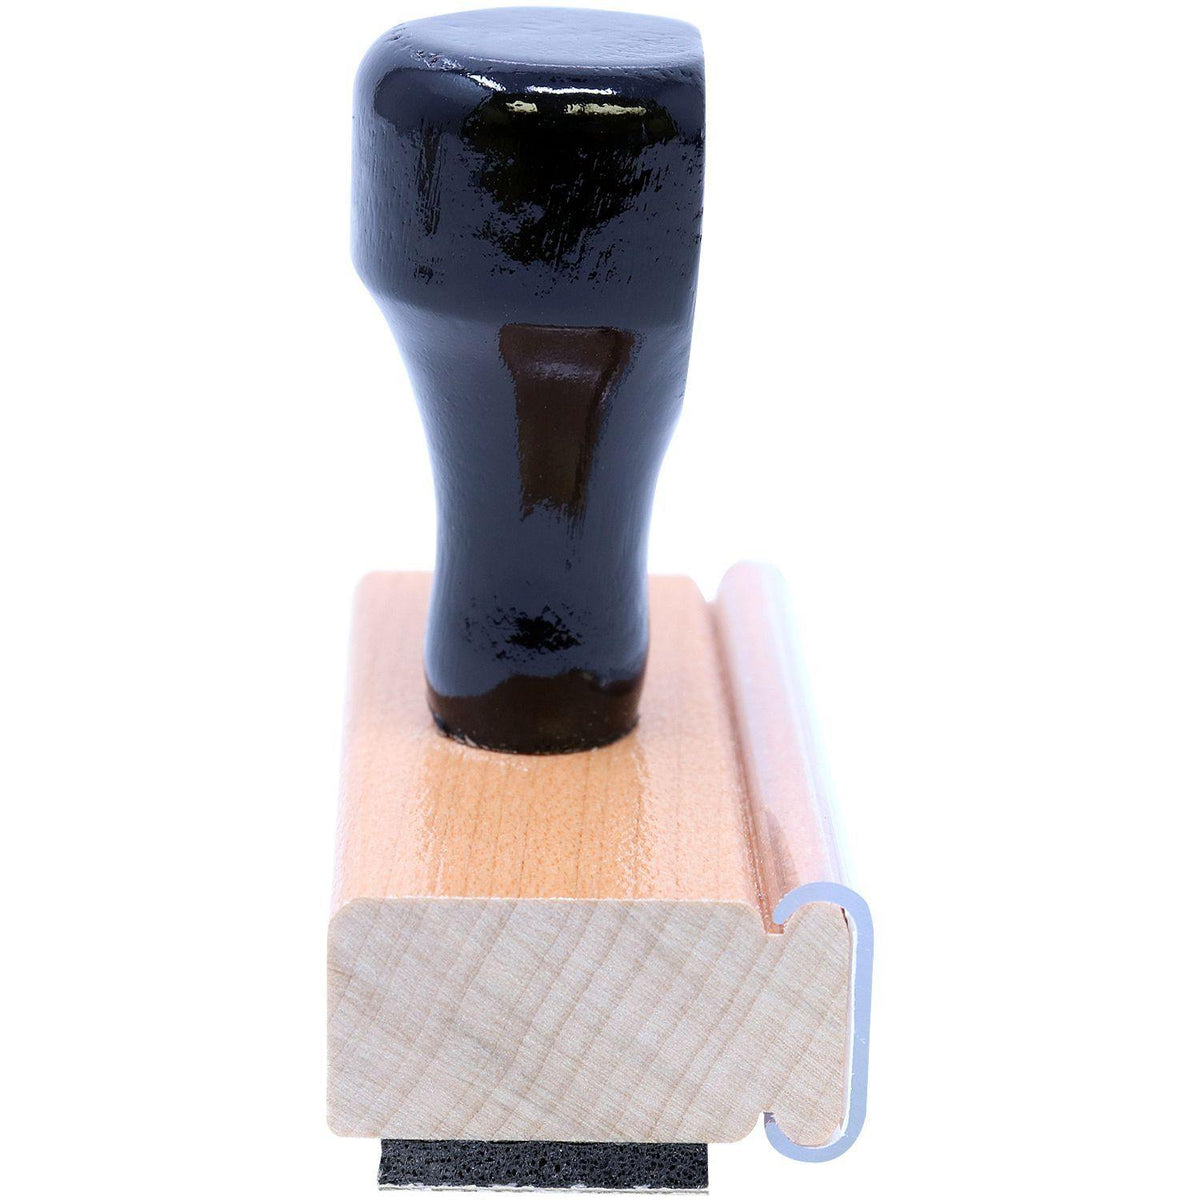 Large Title Work Rubber Stamp - Engineer Seal Stamps - Brand_Acorn, Impression Size_Large, Stamp Type_Regular Stamp, Type of Use_Professional